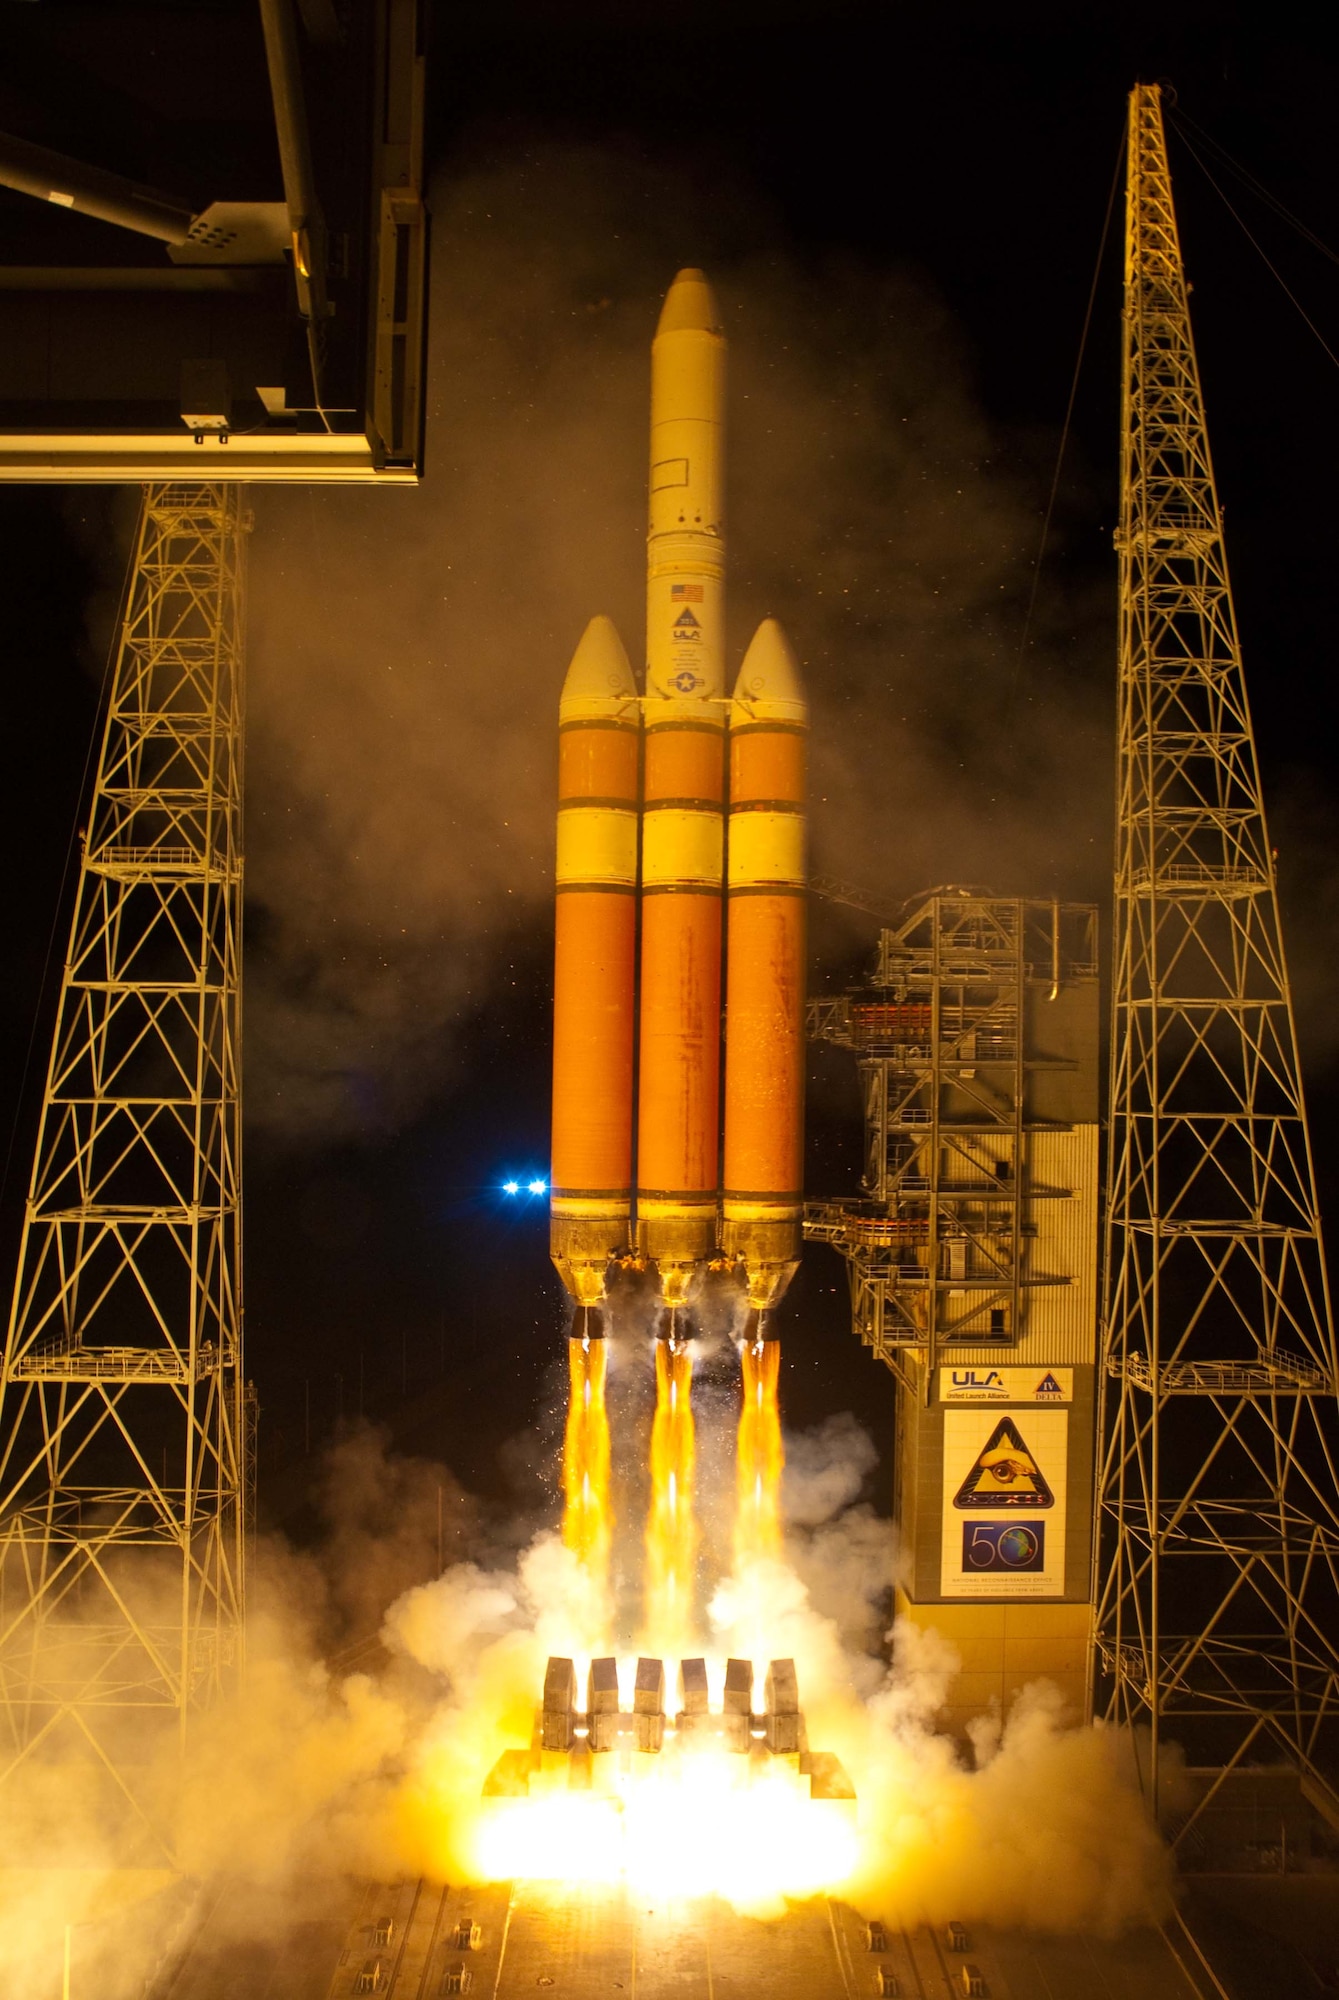 The 45th Space Wing successfully launched a Delta IV-Heavy rocket carrying the NROL-32 classified payload for the National Reconaissaince Office Nov. 21 from Cape Canaveral Air Force Station.  